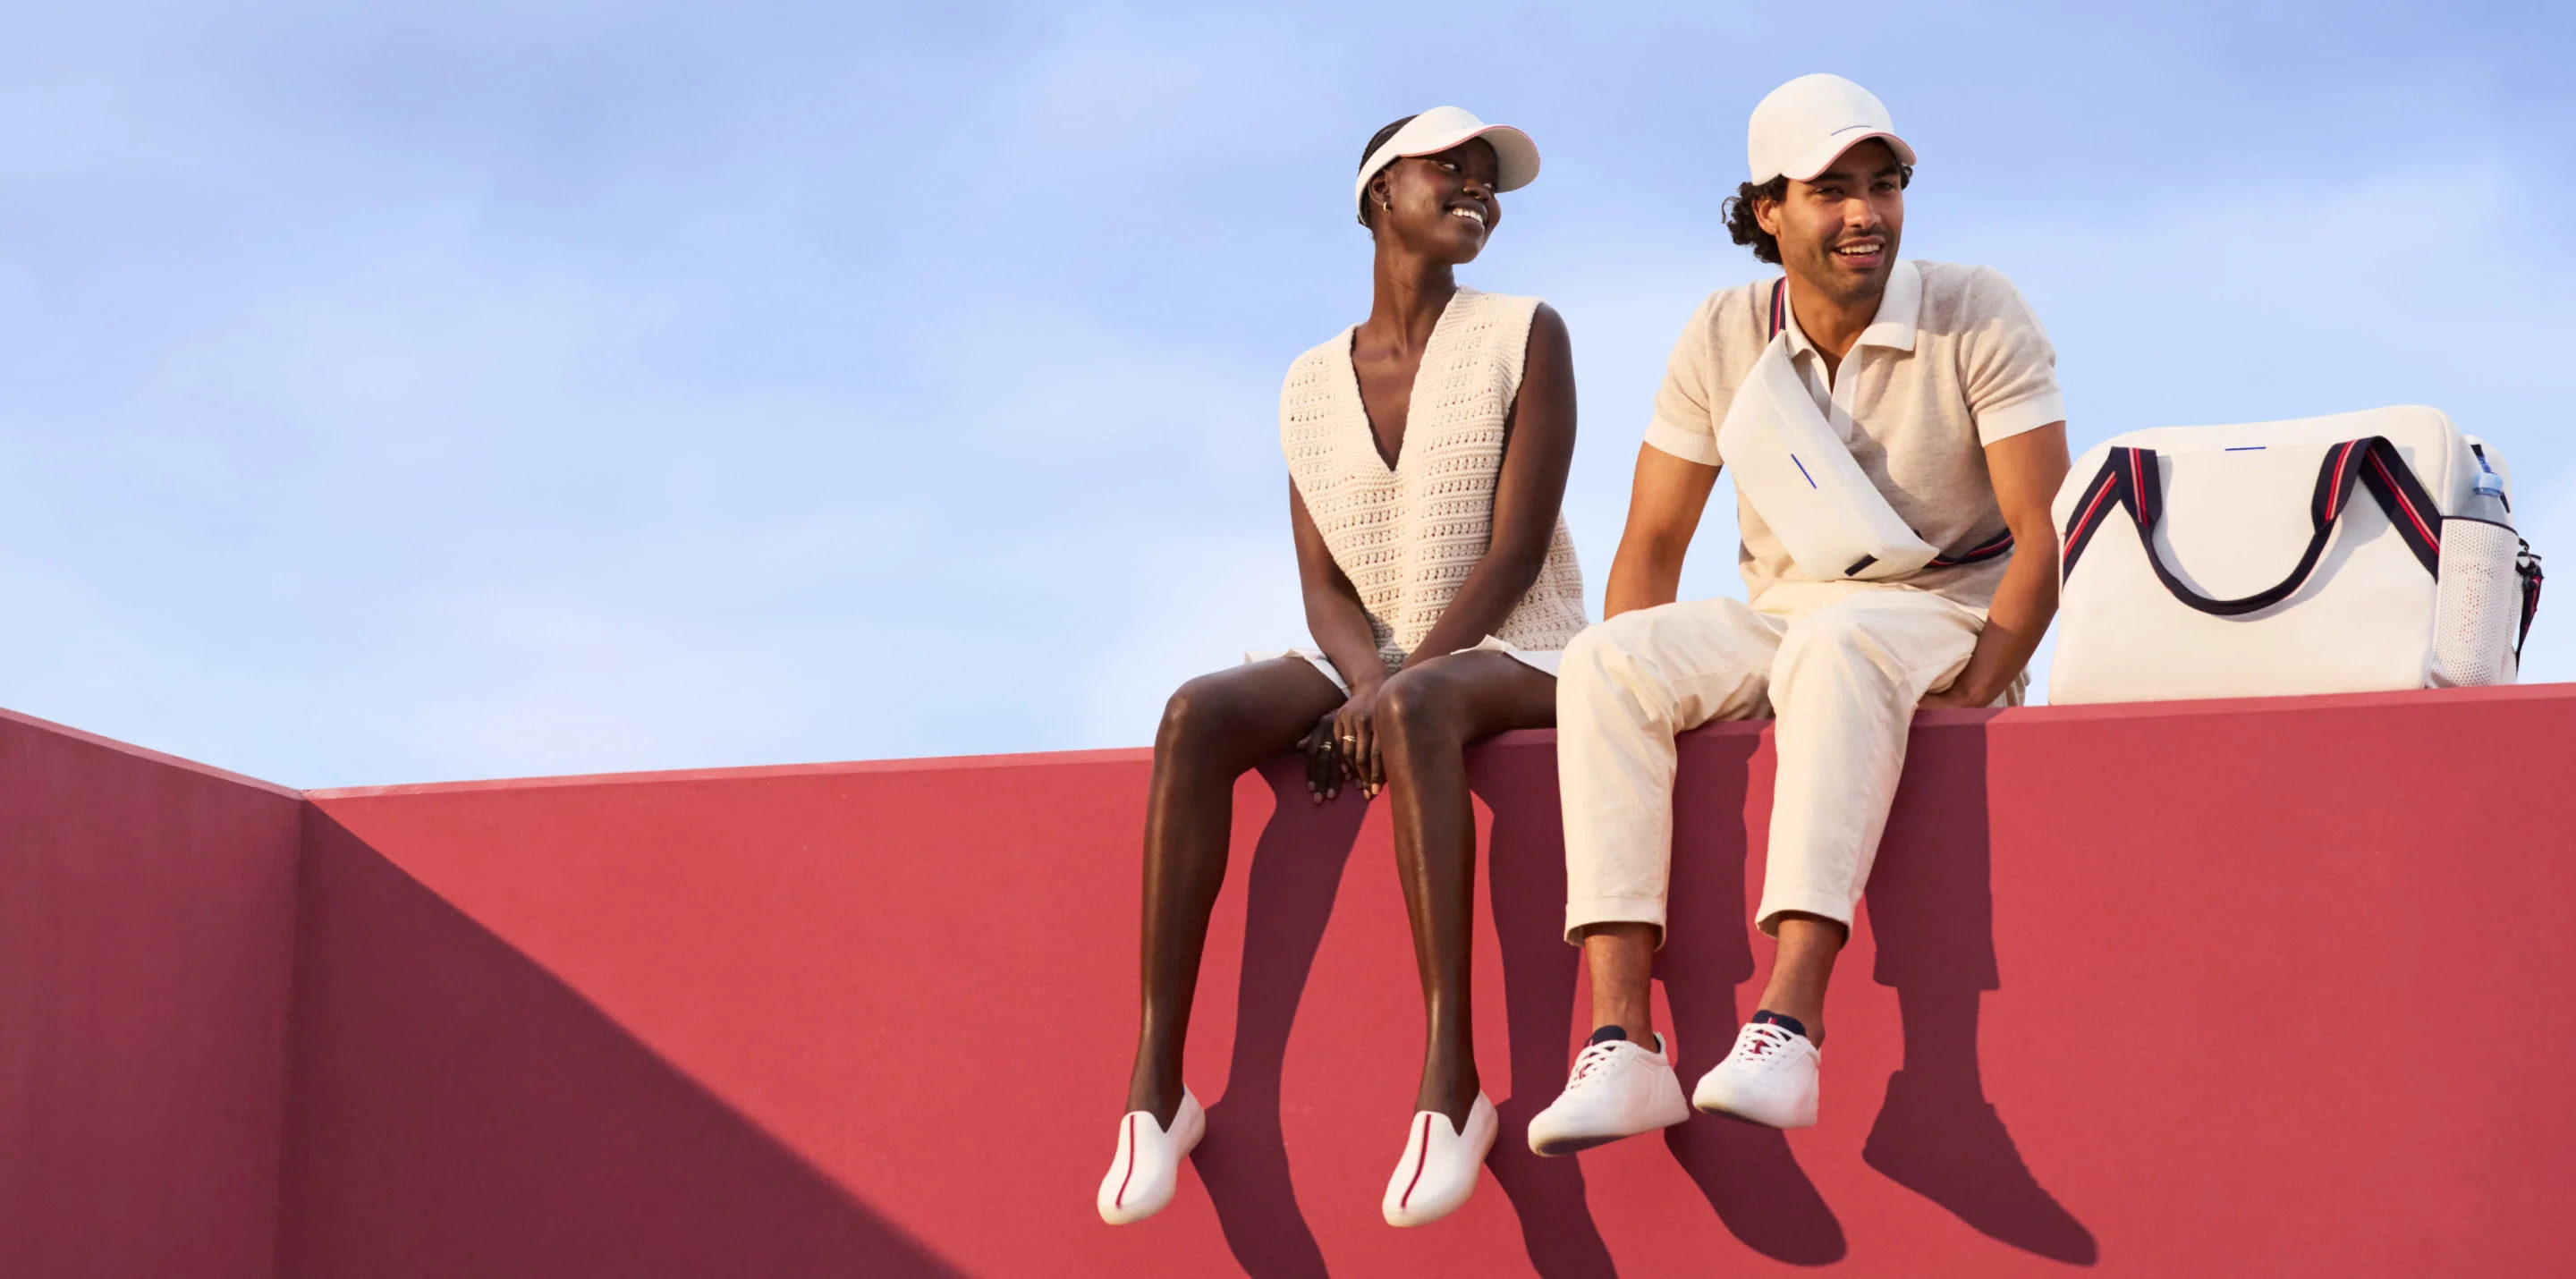 Sustainable fashion brand Rothy’s has launched a tennis-inspired collection created from recycled plastic Evian bottles gathered at last year’s US Open. Photo: Rothy’s